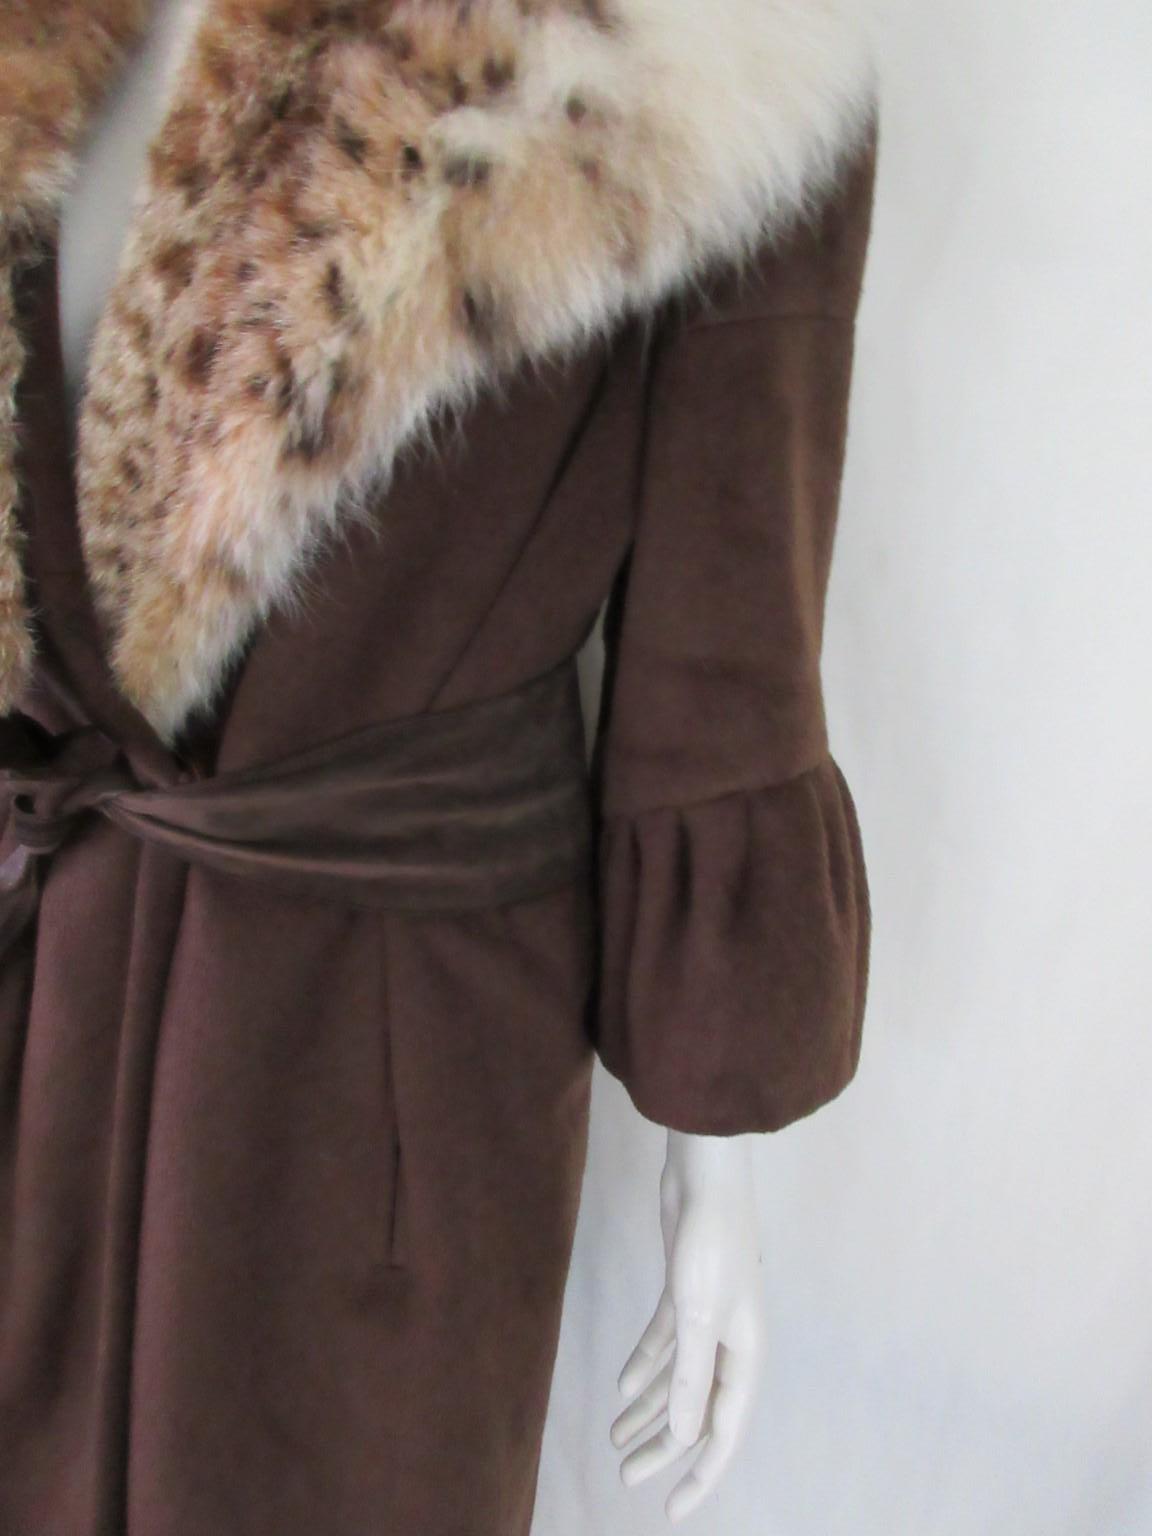 Beautiful vintage very stylish brown wool coat with luxurious lynx fur collar

We offer more exclusive fur items, view our front store

Details:
With 2 side pockets,
1 closing button
3/4 lenght sleeves
Fully lined 
loose brown belt
Size fits aprox.